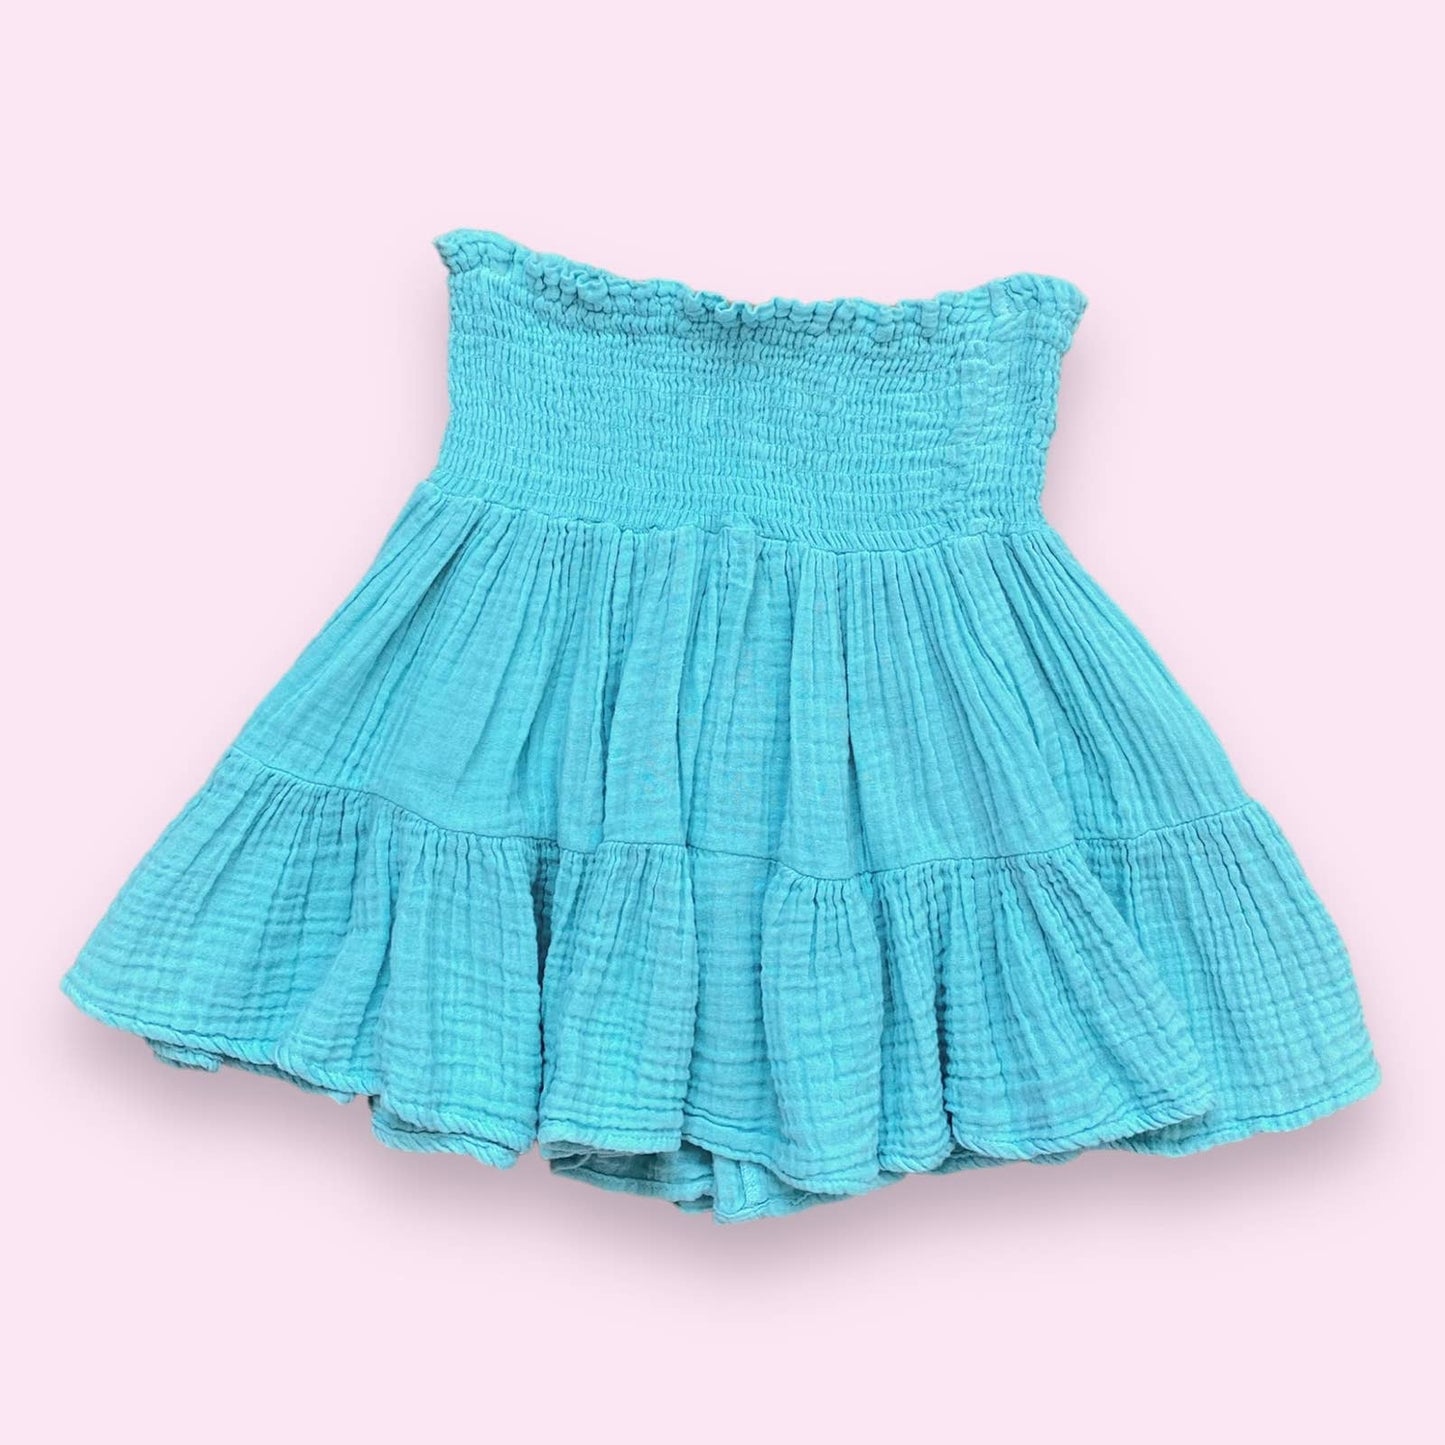 Secondhand Blue Life Tiered Ruffle Gauze Mini Skirt, Size Small